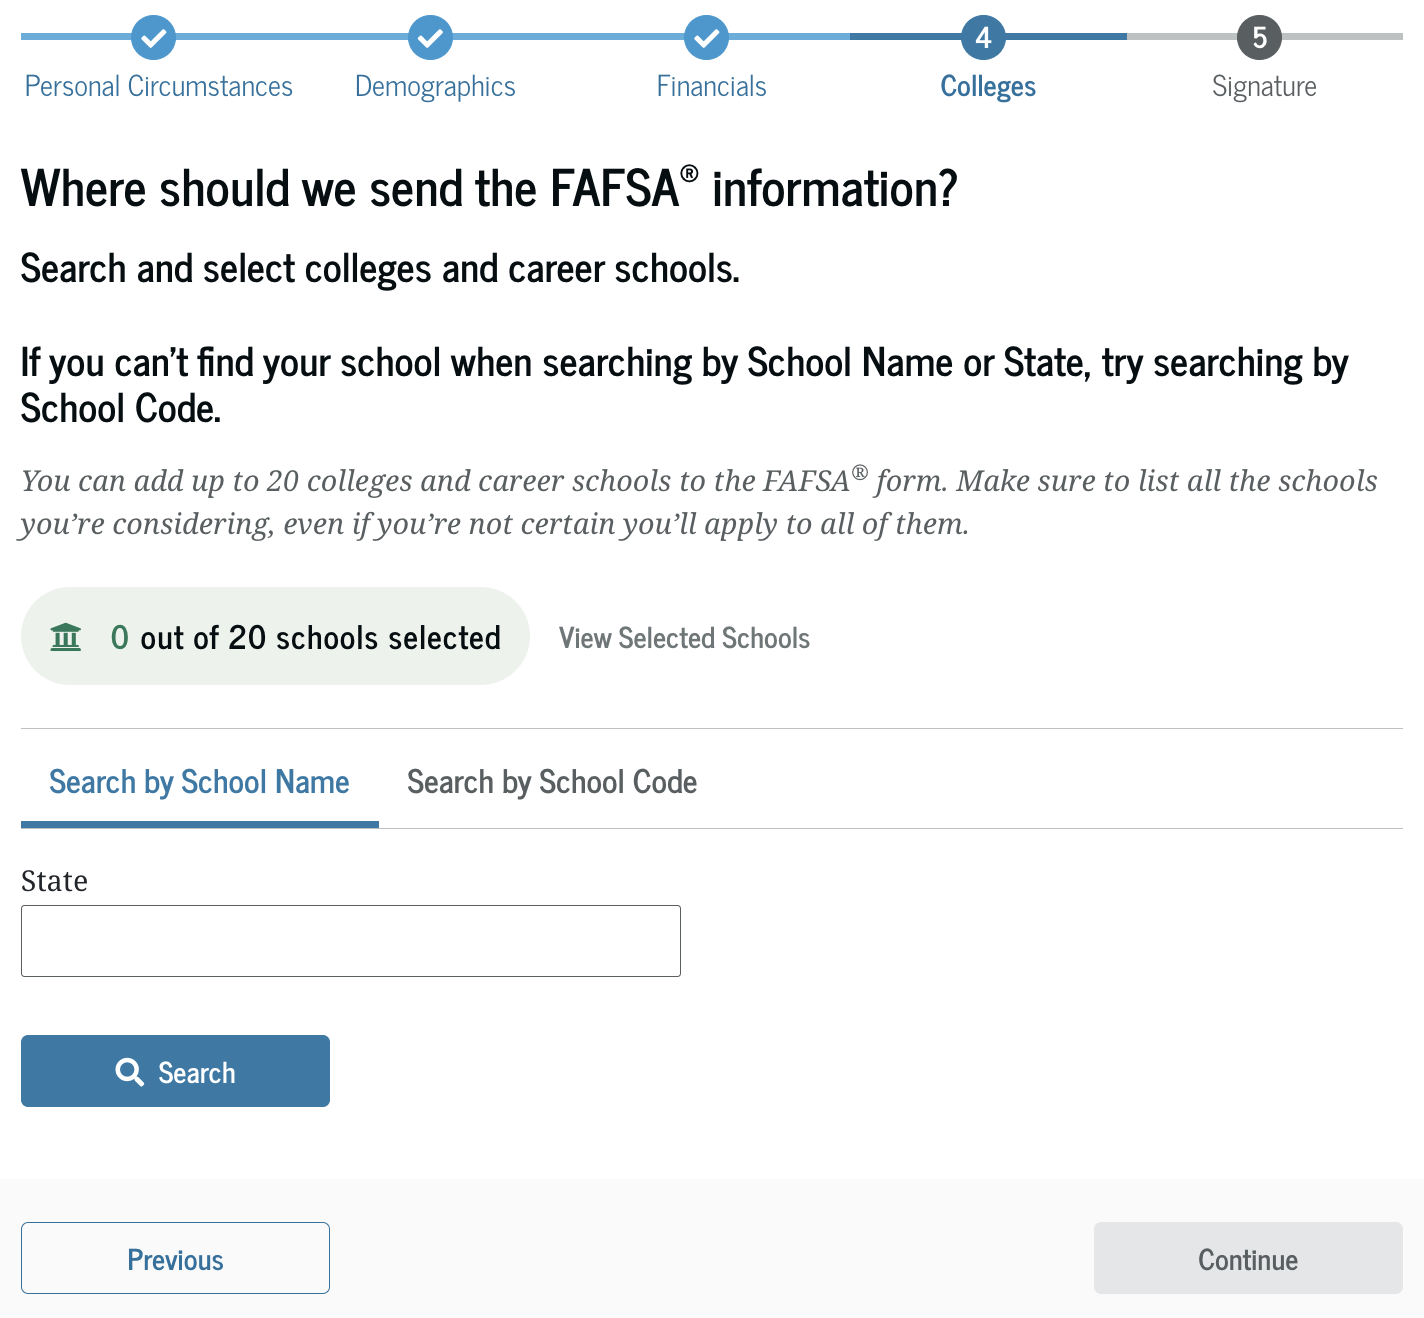 A screenshot showing how to search for schools in the FAFSA form to send FAFSA information.